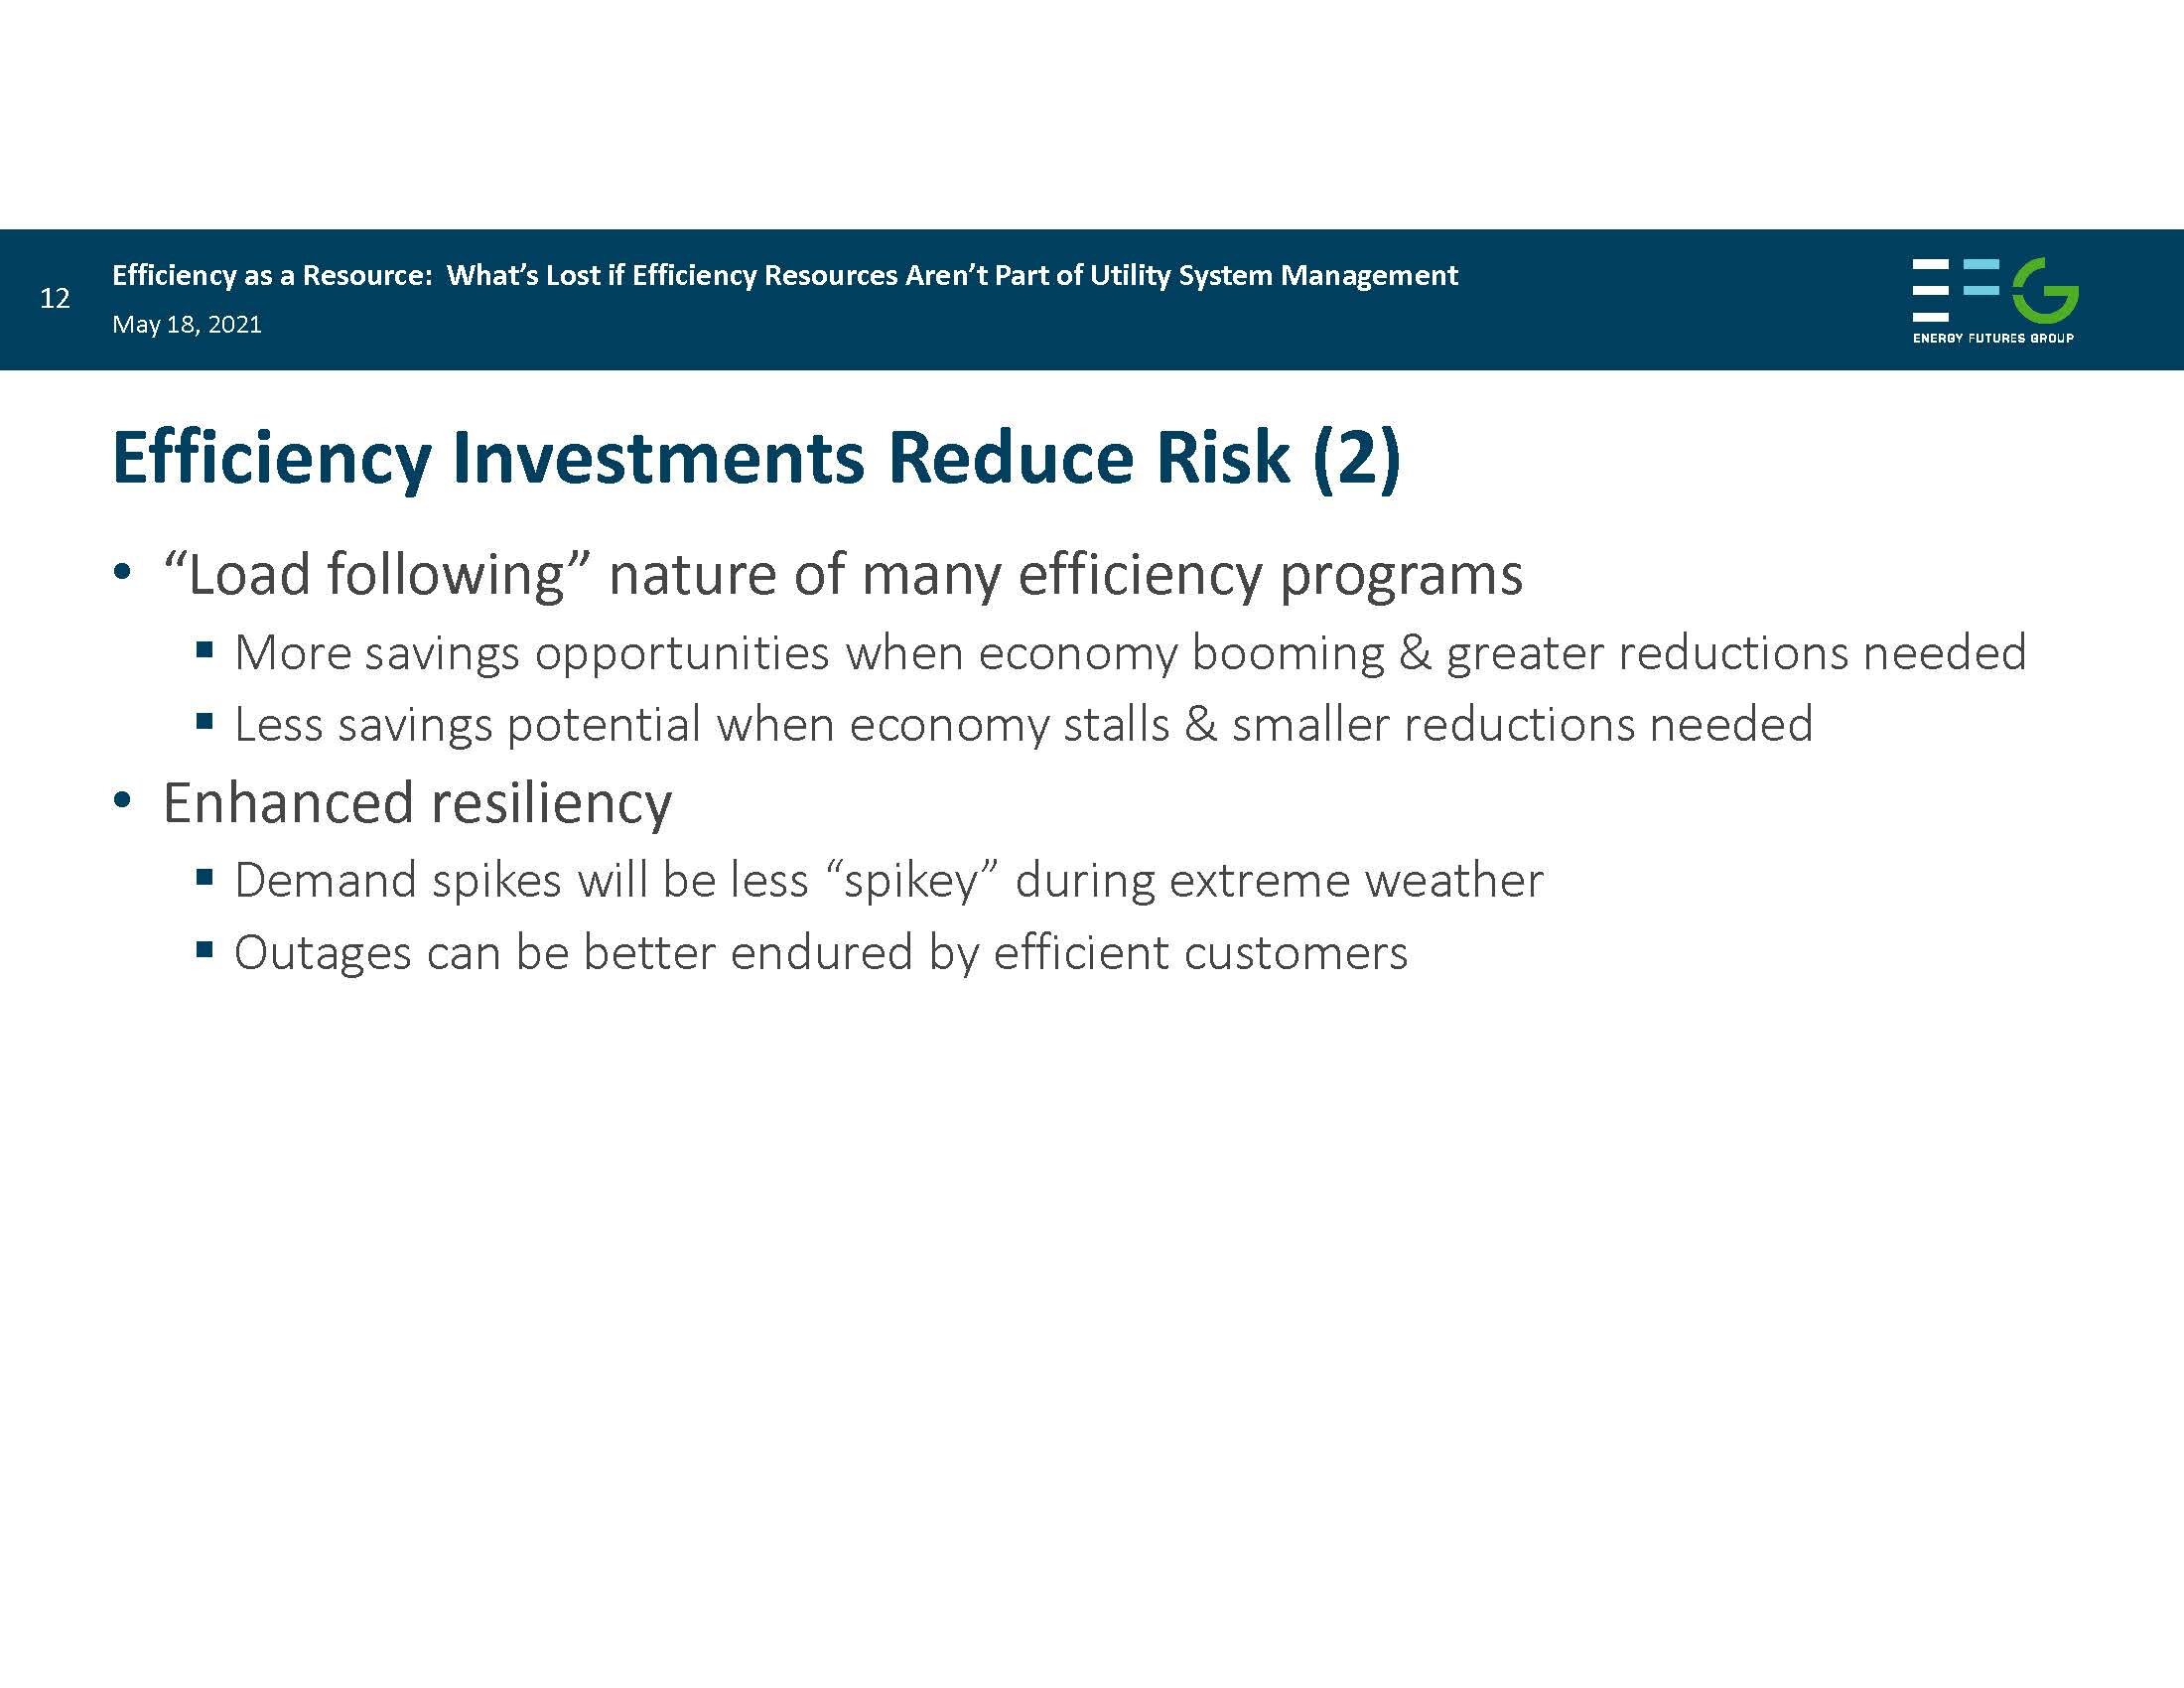 Energy Efficiency as a Resource Chris Neme Energy Futures_Page_12.jpg